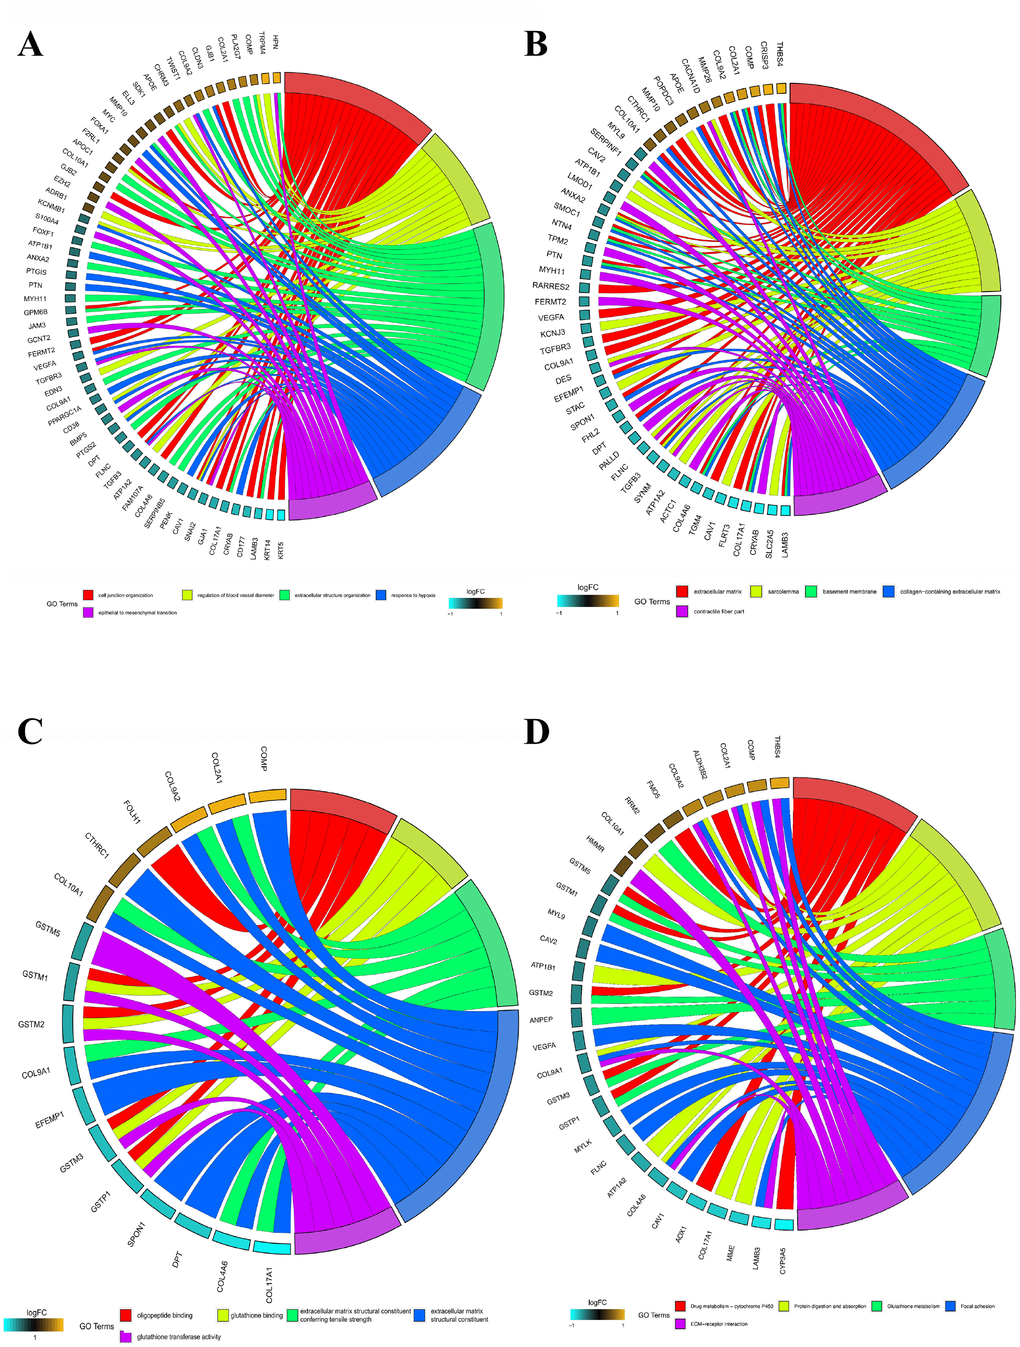 GO and KEGG analysis of top 300 DEGs. (A) Chord plot depicting the relationship between genes and GO terms of biological process. (B) Chord plot depicting the relationship between genes and GO terms of cellular component. (C) Chord plot depicting the relationship between genes and GO terms of molecular function. (D) Chord plot indicates the relationship between genes and KEGG pathways. GO, Gene Ontology; KEGG, Kyoto Encyclopedia of Genes and Genomes.